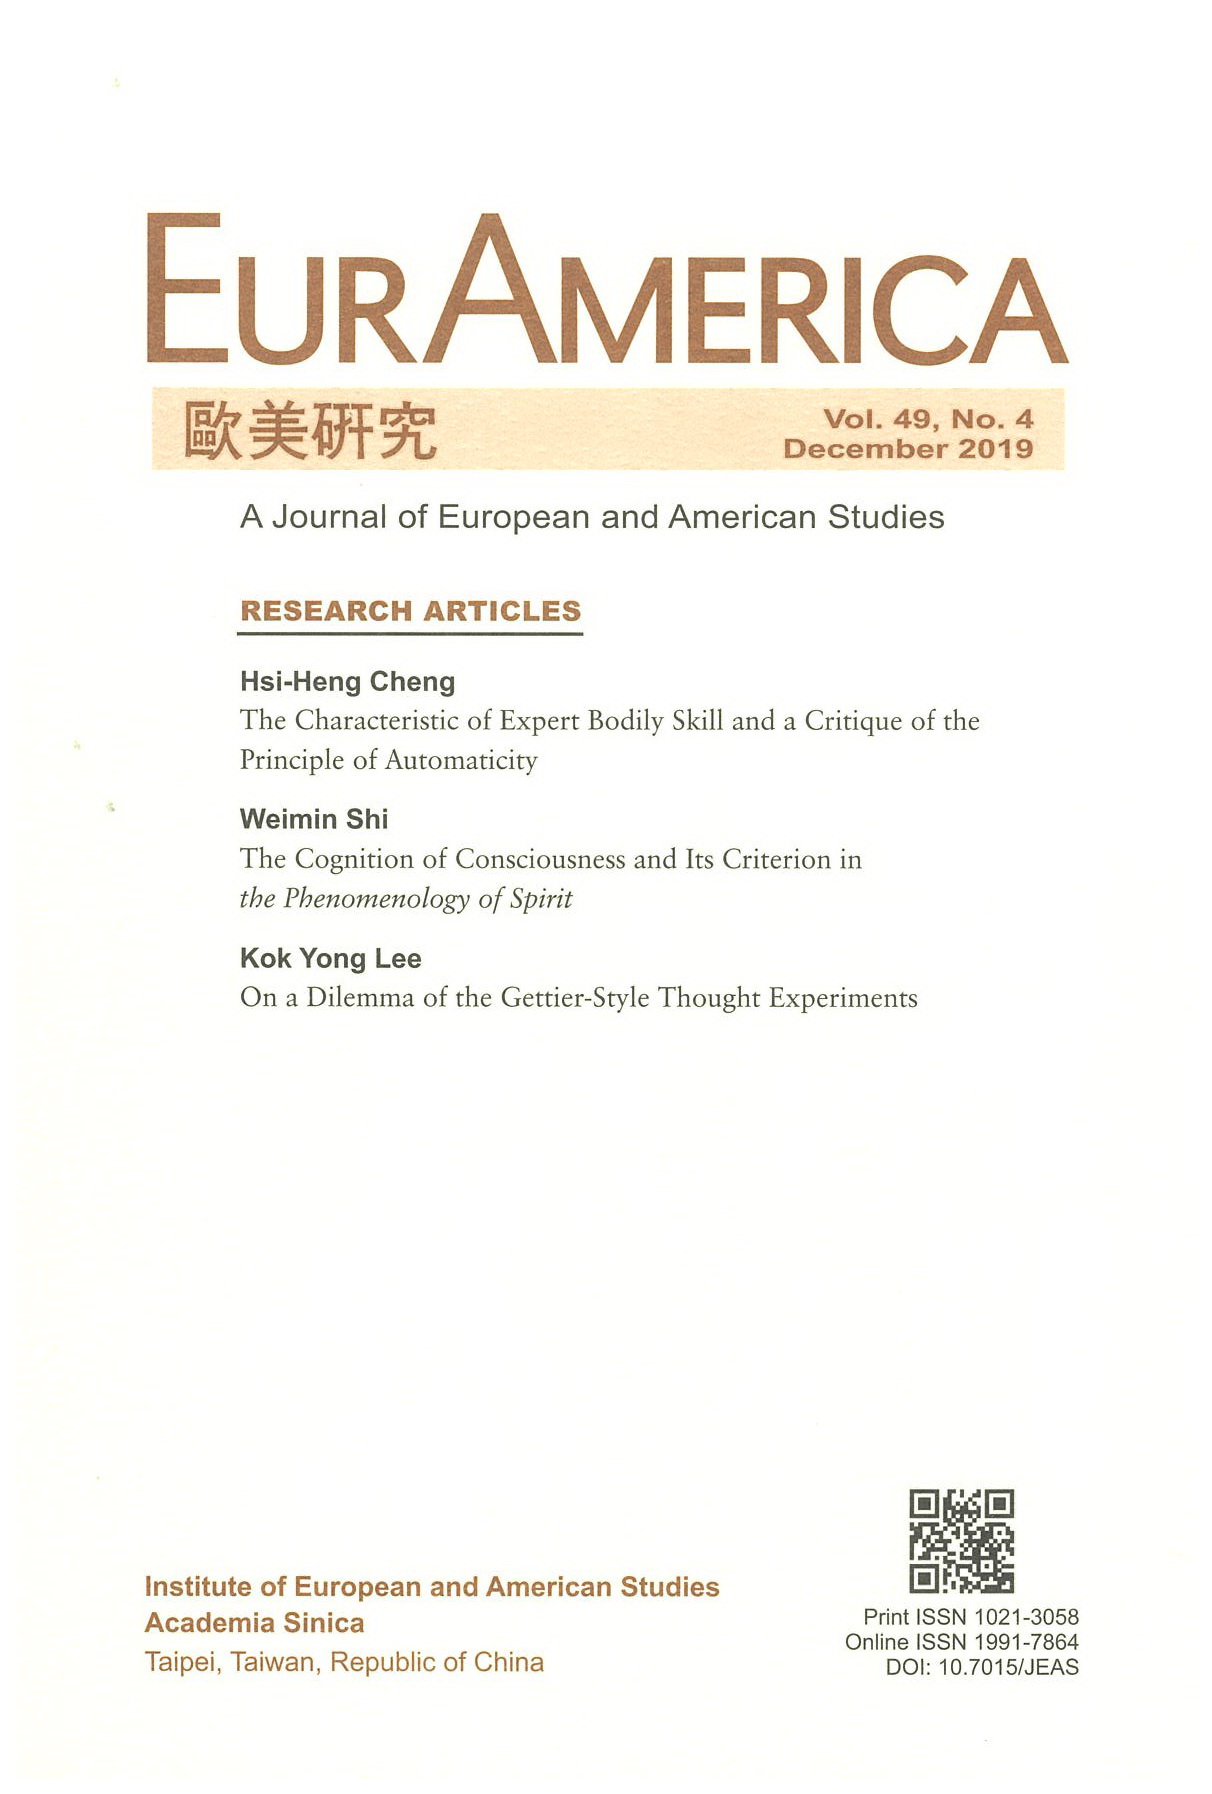 EurAmerica, Vol. 49, No. 4 is now available